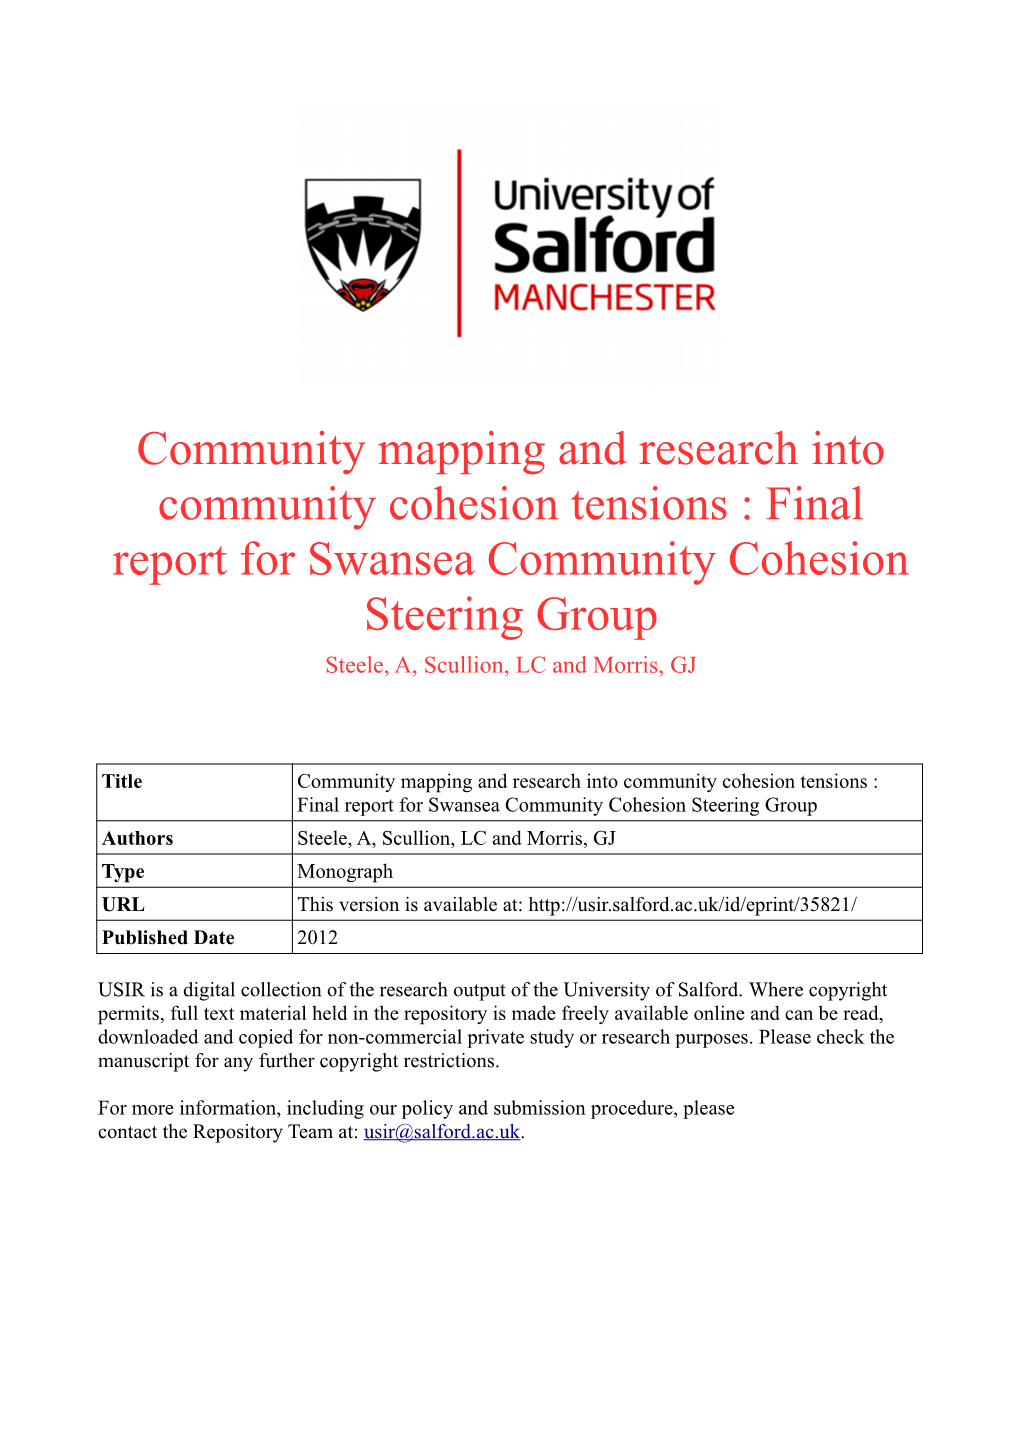 Community Mapping and Research Into Community Cohesion Tensions : Final Report for Swansea Community Cohesion Steering Group Steele, A, Scullion, LC and Morris, GJ